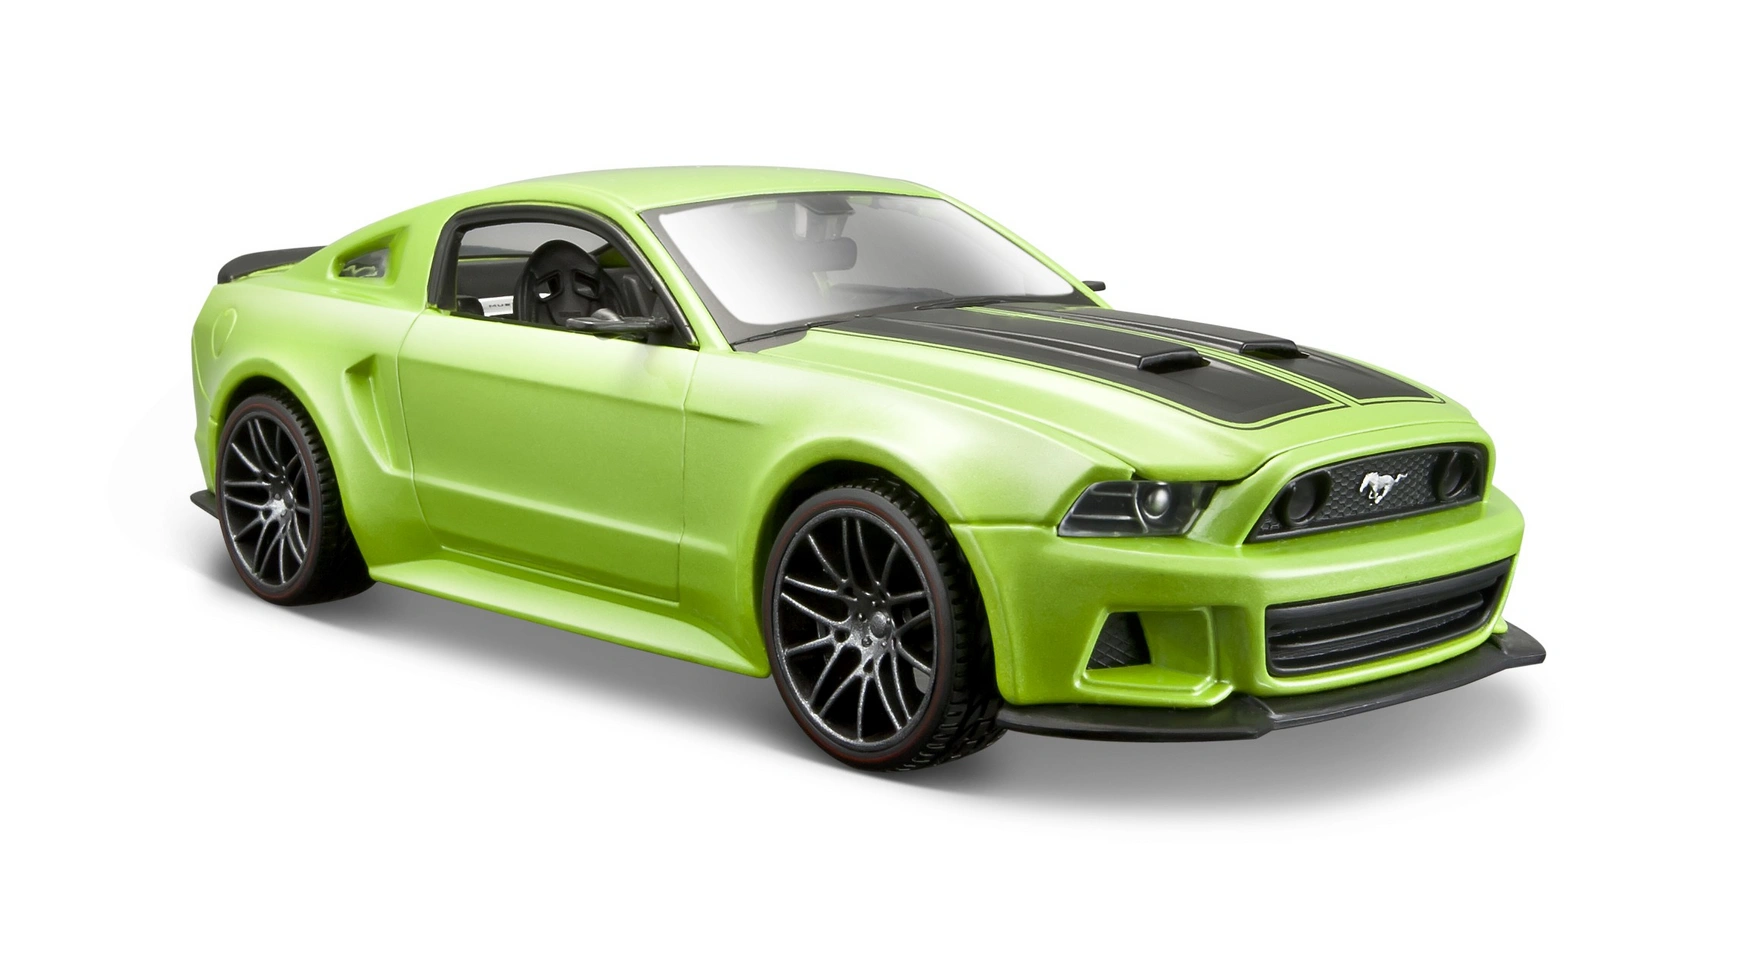 Maisto 1:24 Ford Mustang Street Racer 14 maisto 1 24 ford 2014 mustang street racer special edition metal luxury vehicle diecast pull back cars model toy collection